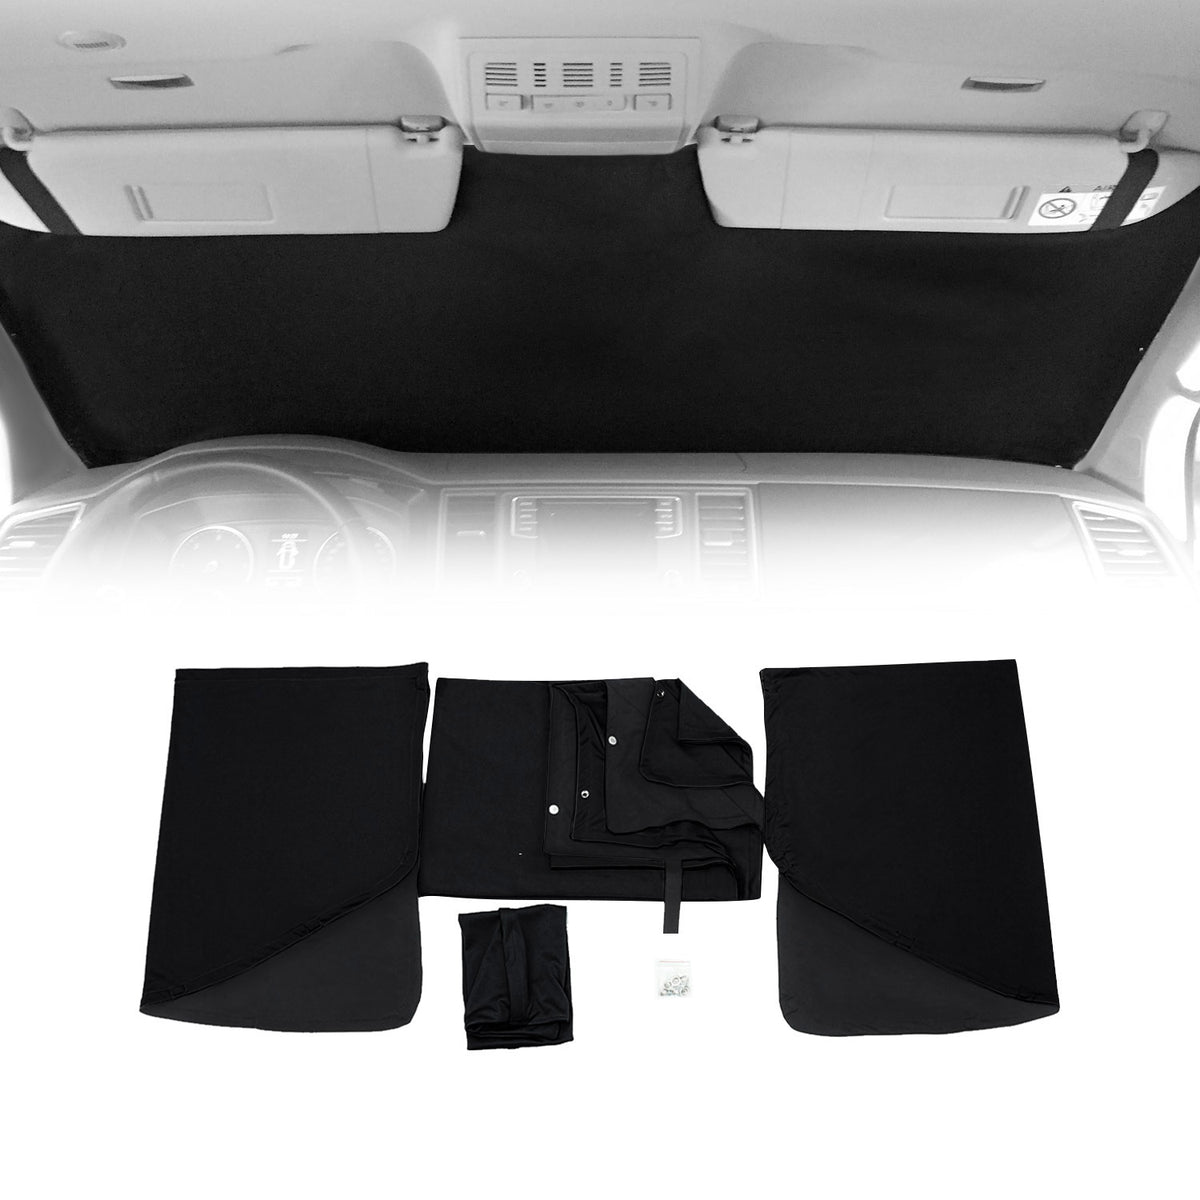 Front window curtains made-to-measure curtains for VW T5 & T6 Multivan Camping black 3-piece